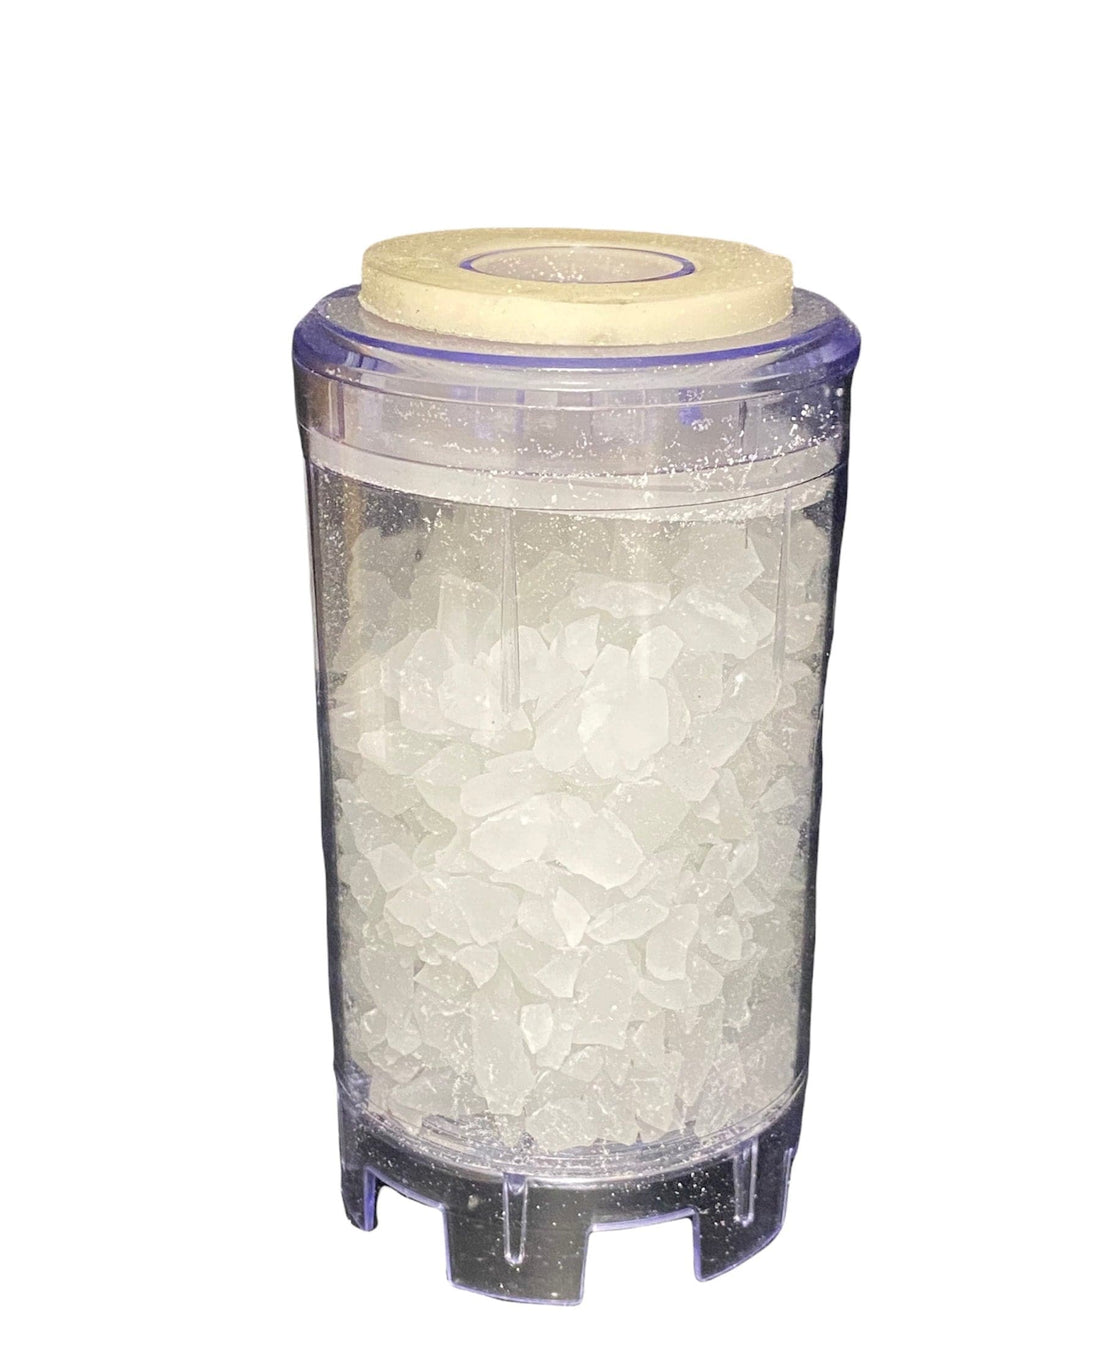 POLYPHOSPHATE SALT CARTRIDGE 5 INCHES ANTI-SETTLING AND ANTI-SCALE